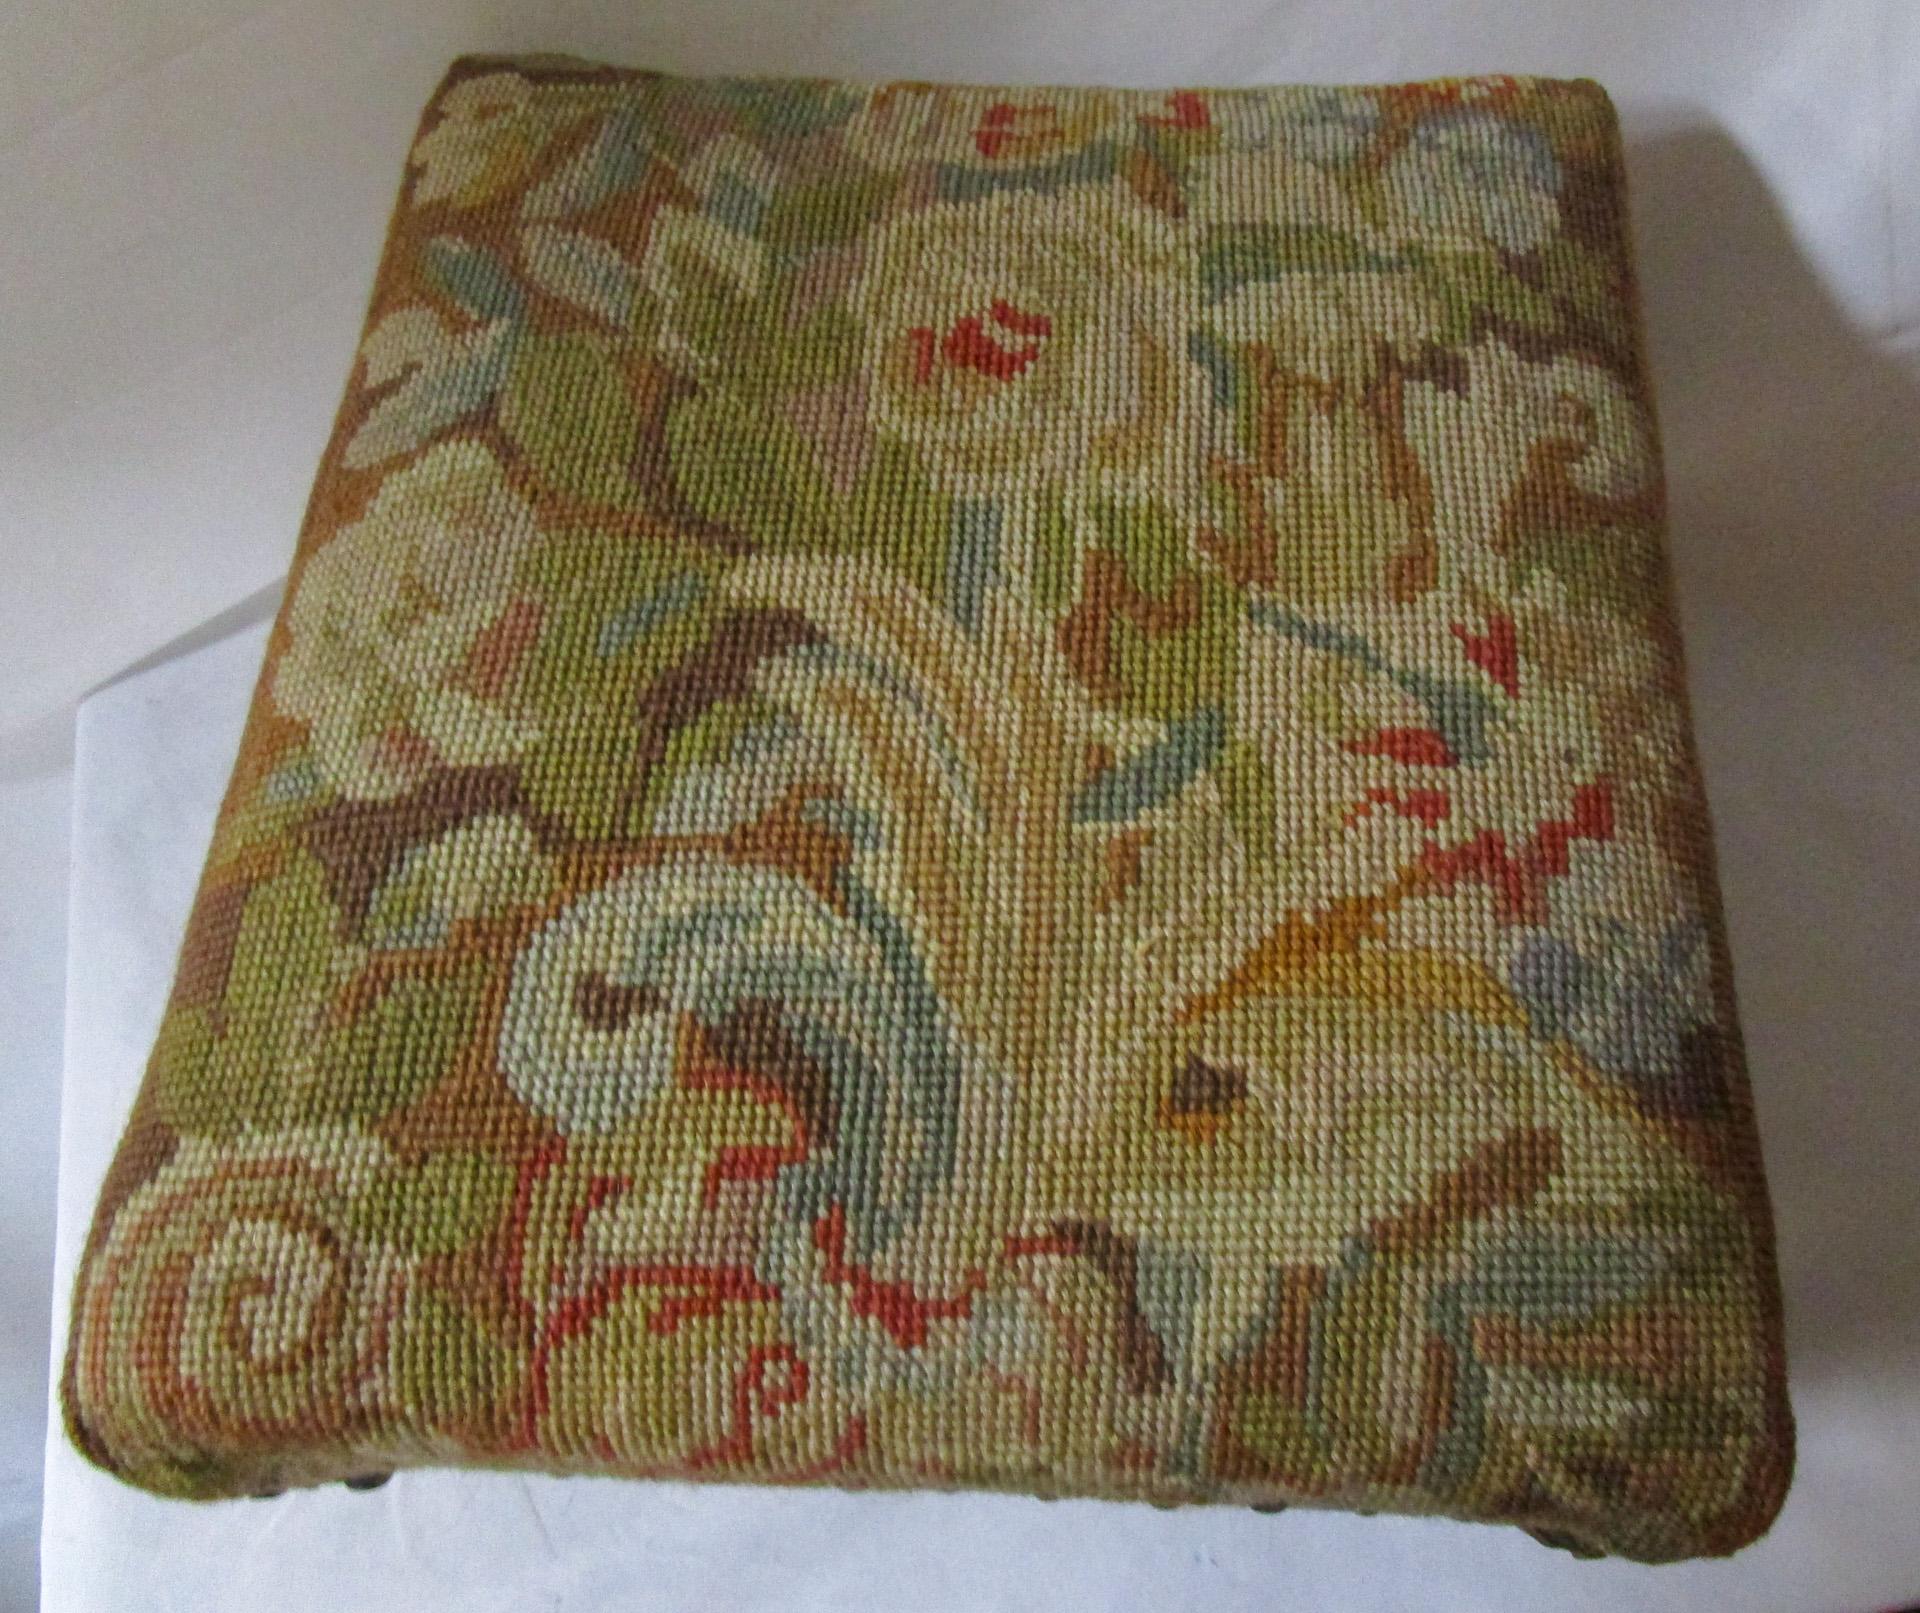 Mid-19th Century French Napoleon III Giltwood 19th Century Footstool with Needlepoint Upholstery